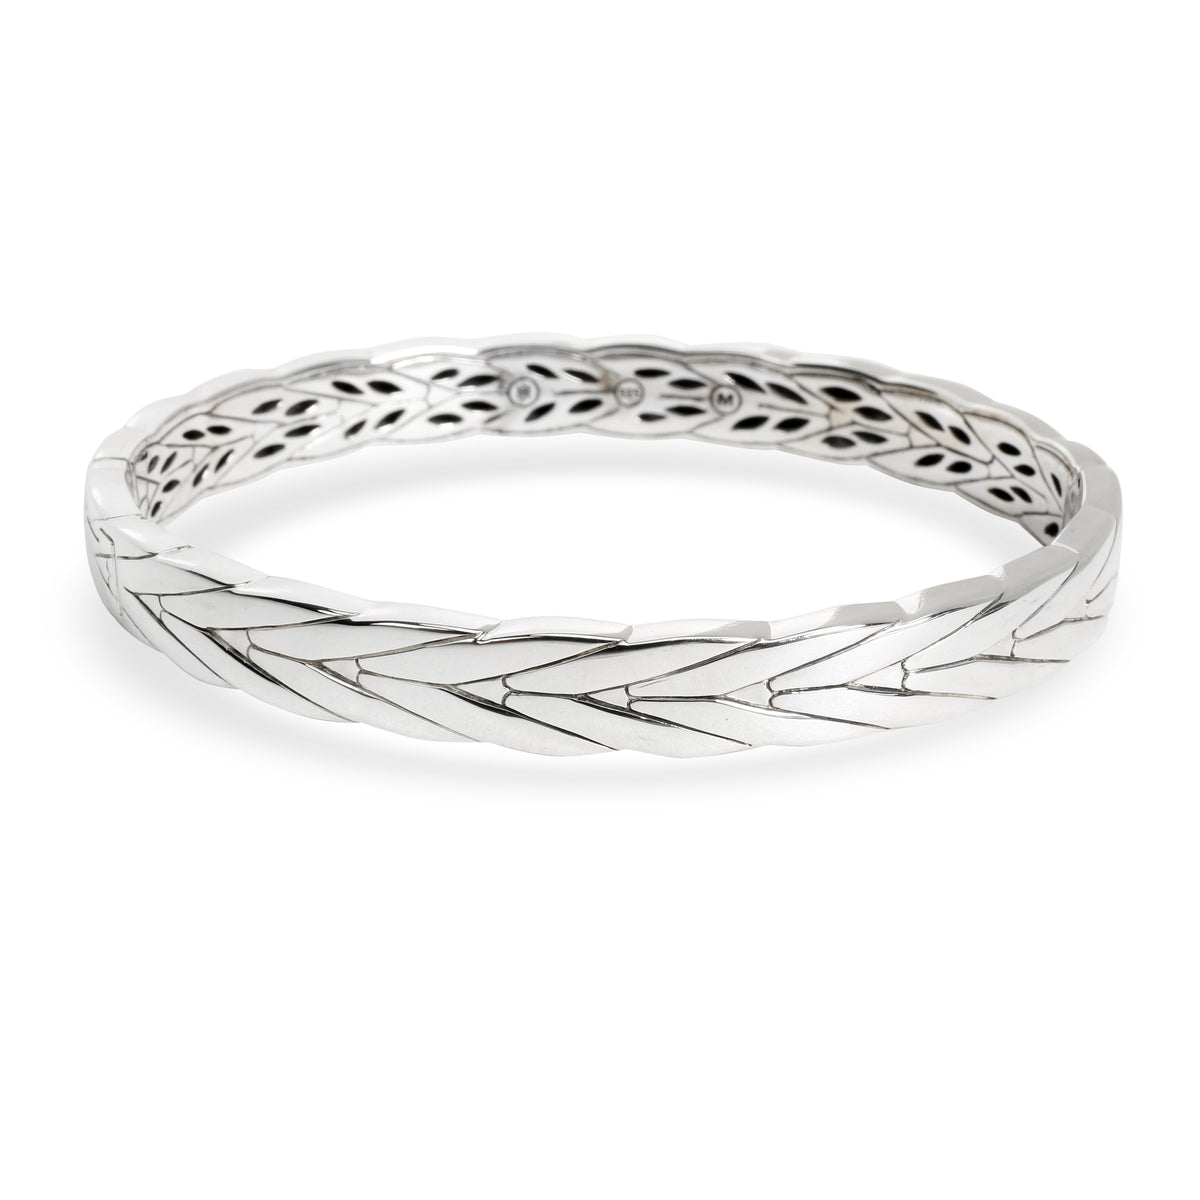 John Hardy Modern Chain Hinged Bangle in Sterling Silver 8mm